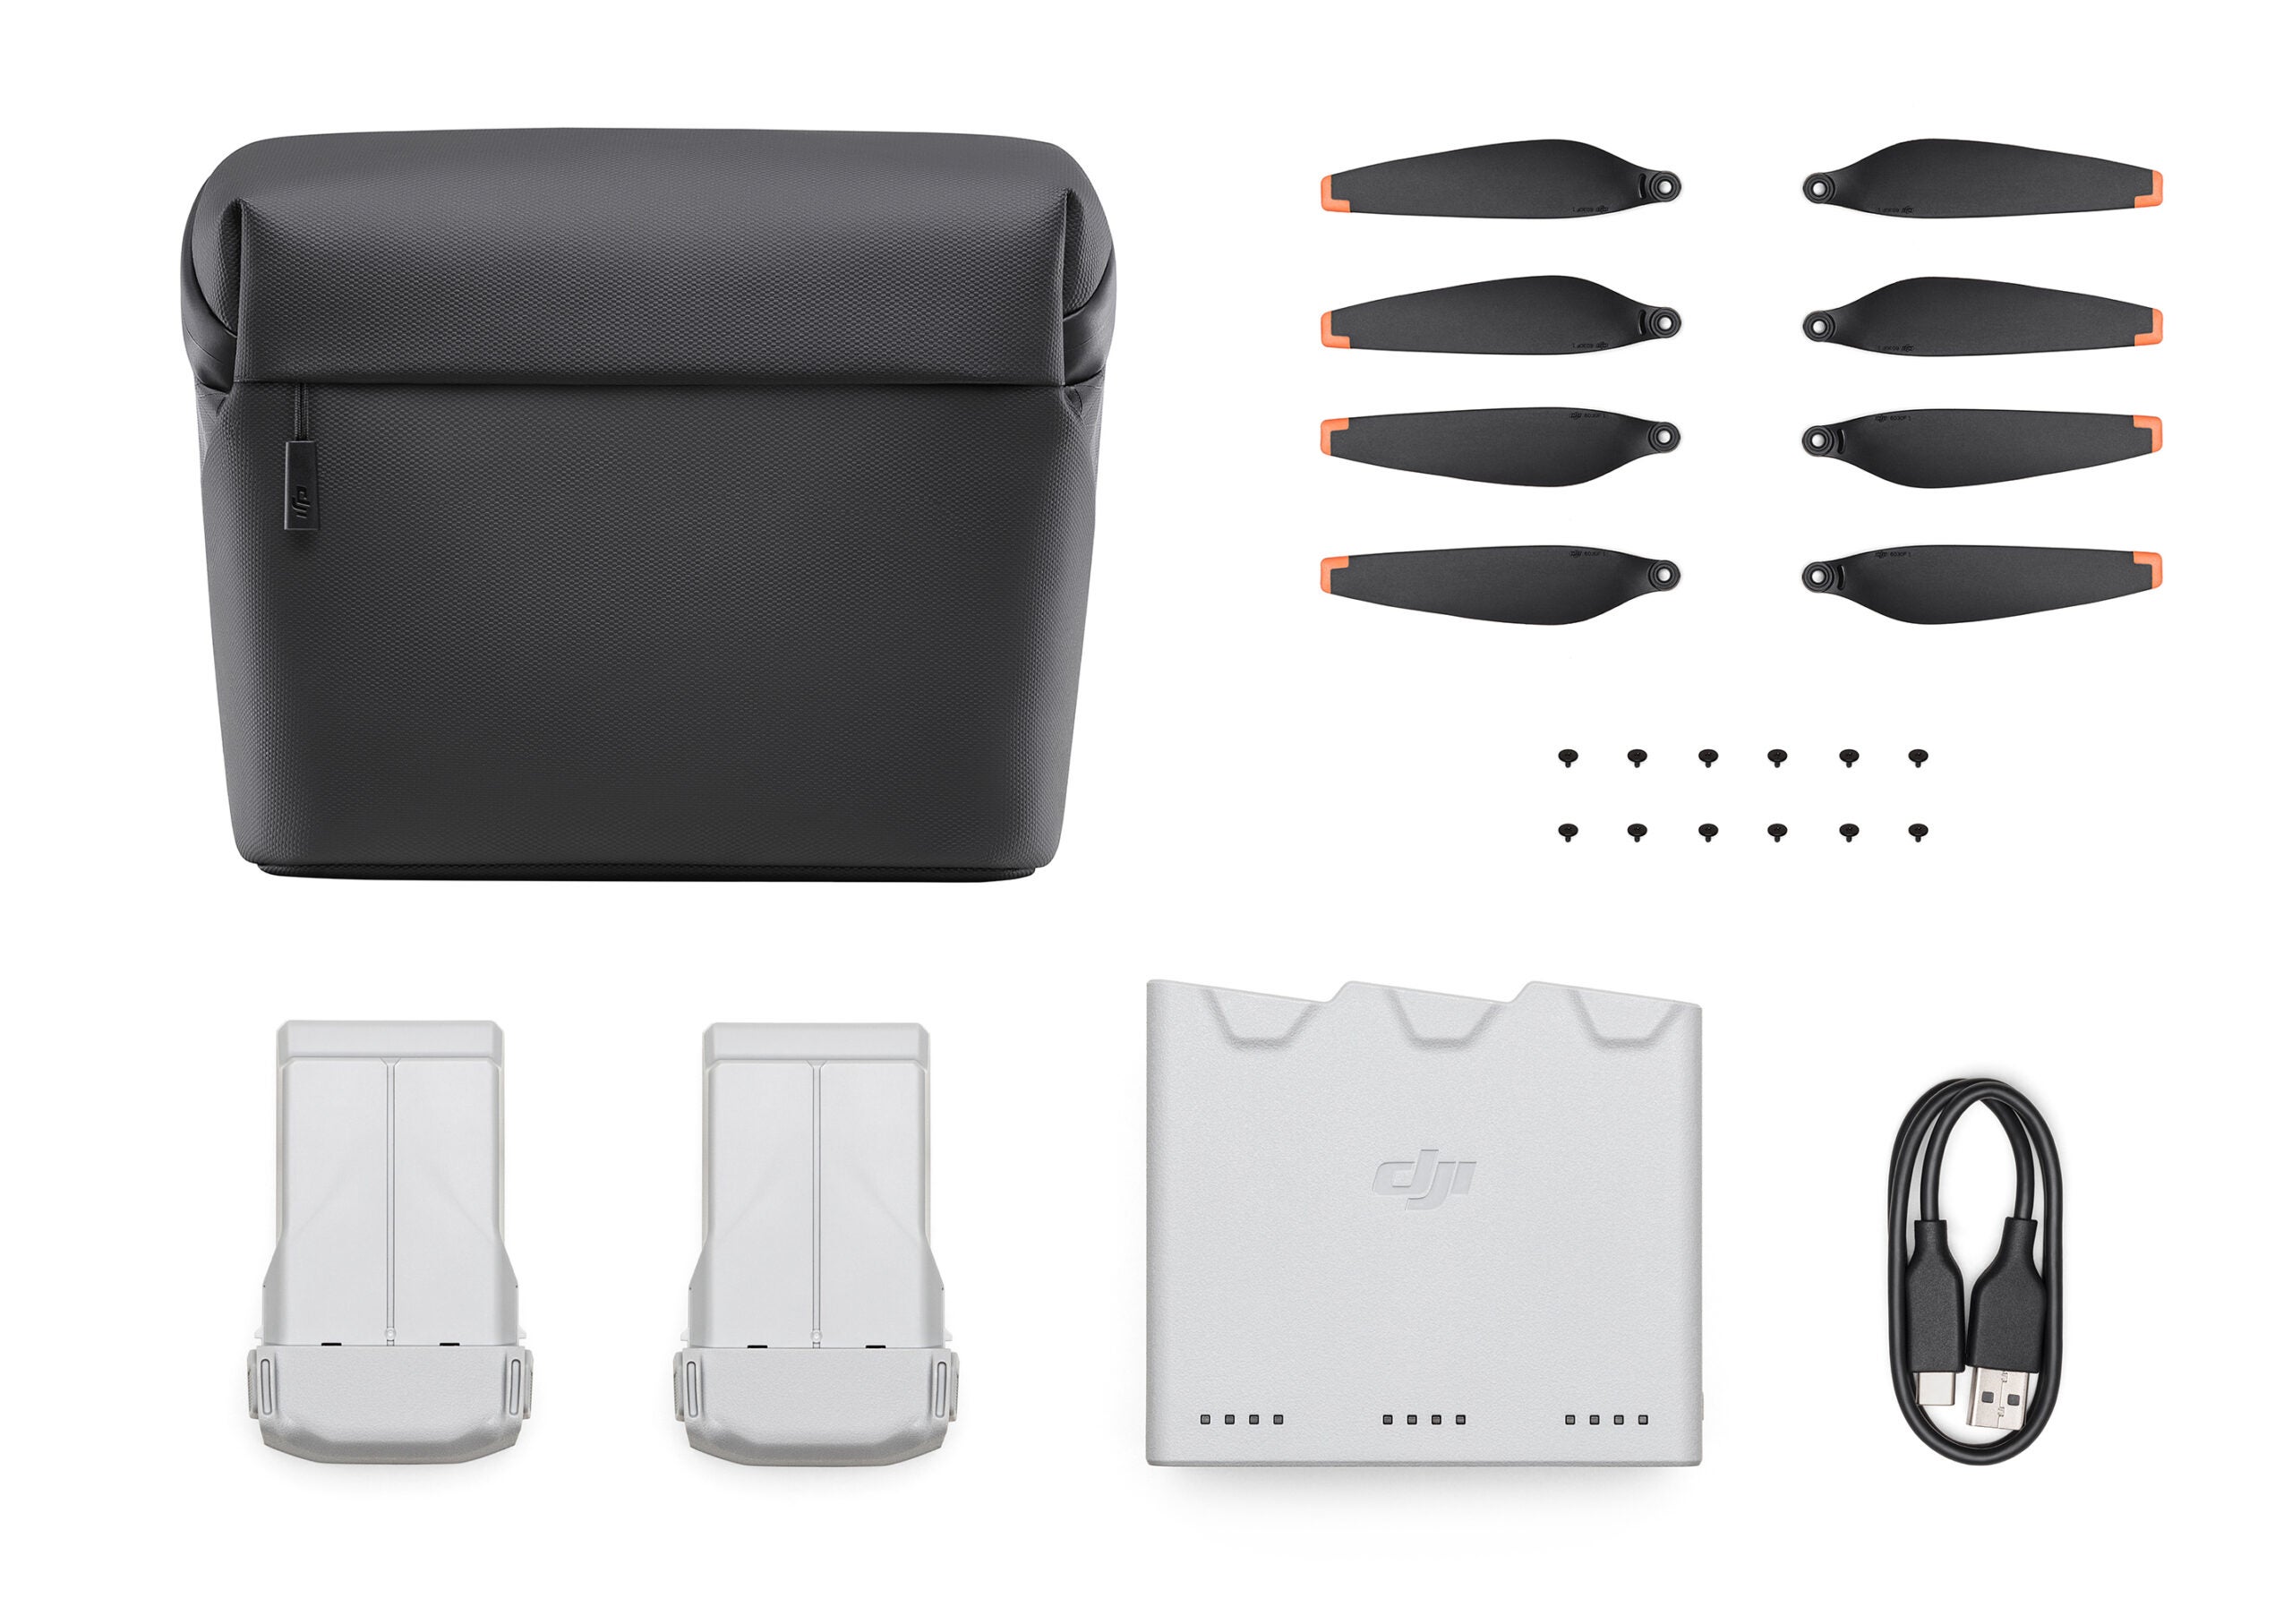 DJI is now selling the Fly More kits separately from the drones. The two kits include two batteries, spare props, a charging hub, USB-C cable and compact shoulder bag.